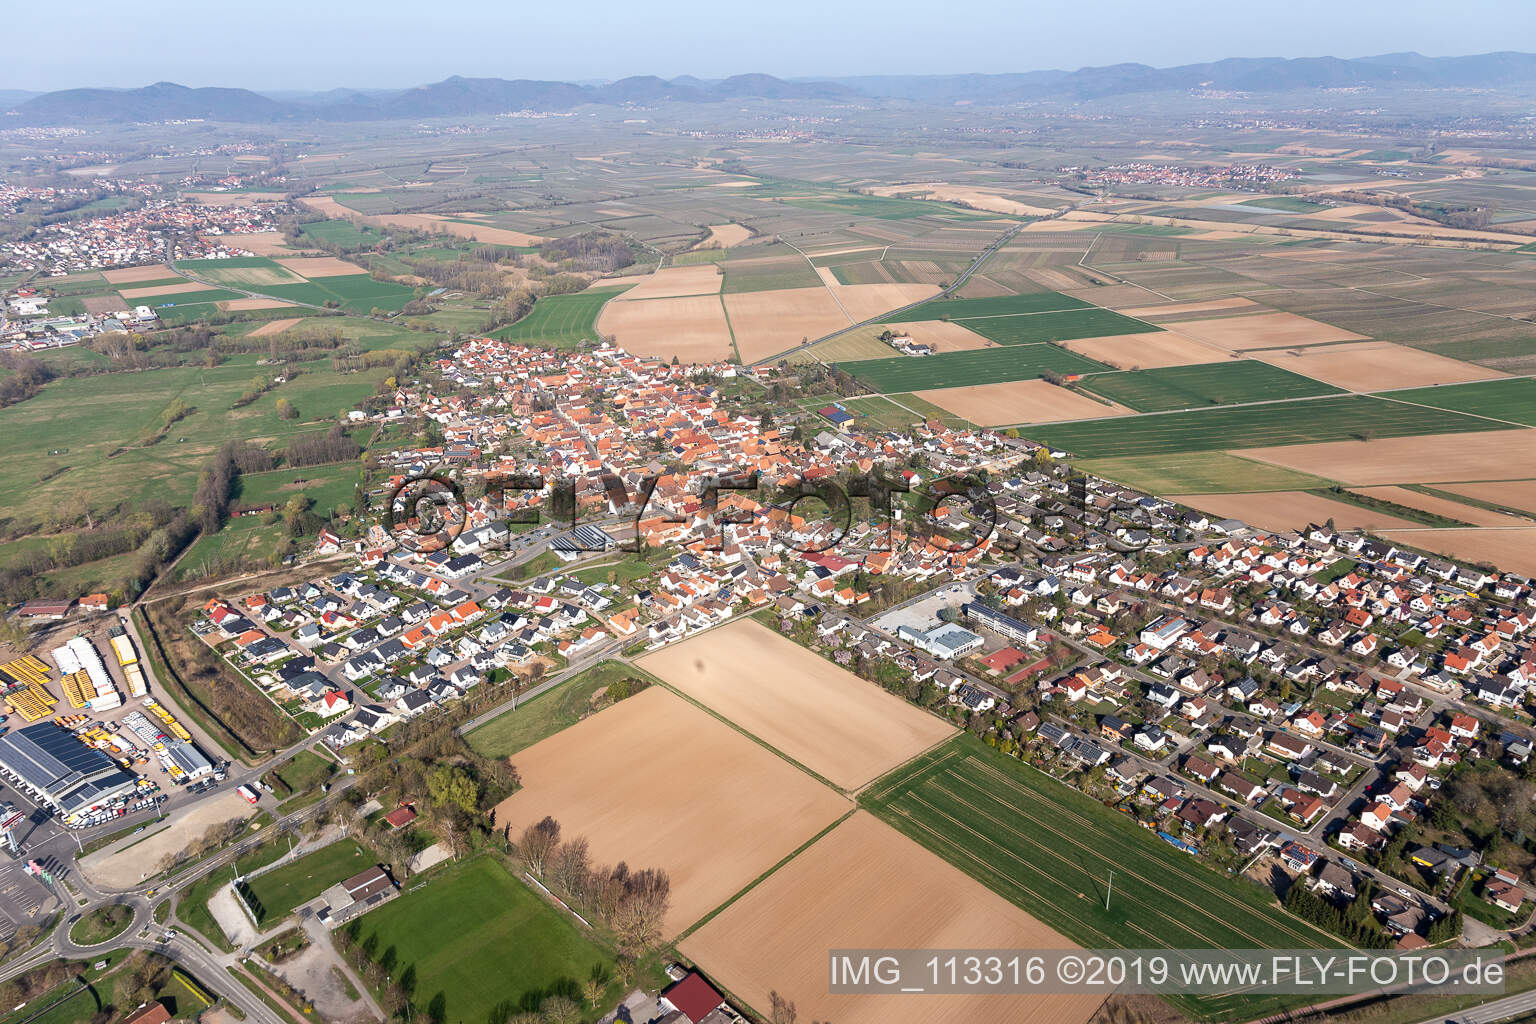 Village - view on the edge of agricultural fields and farmland in Rohrbach in the state Rhineland-Palatinate, Germany from above